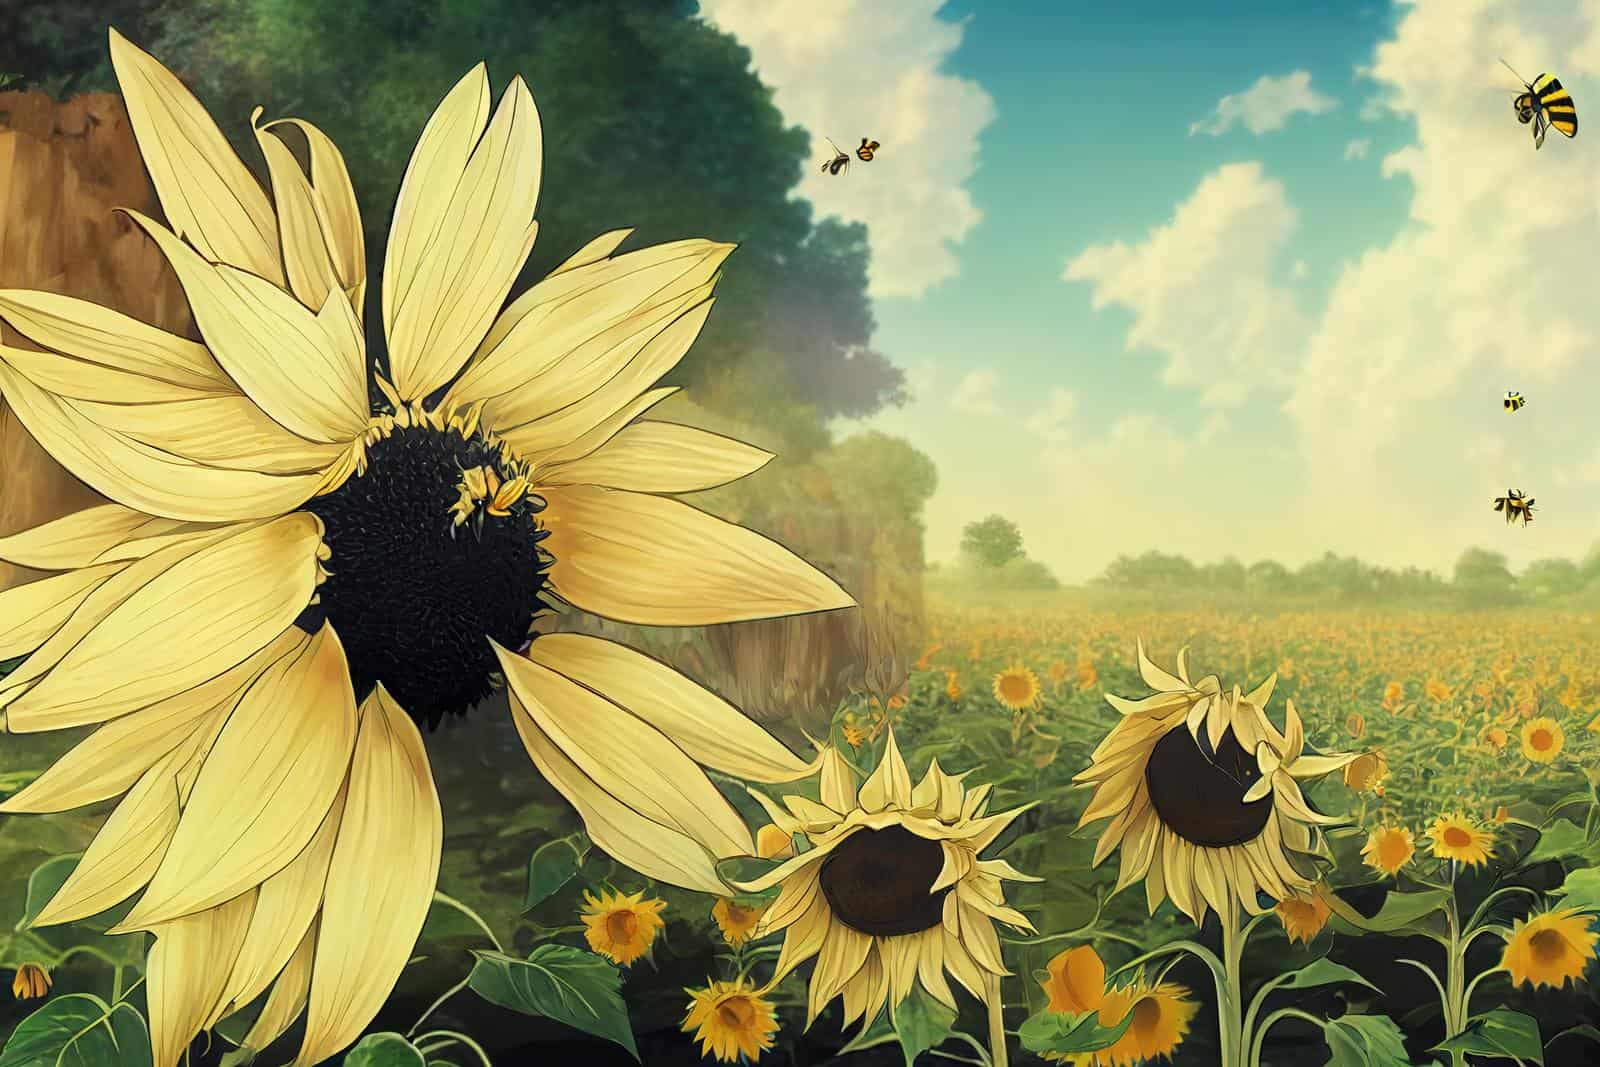 Bee over the sunflower. High quality 2d illustration.